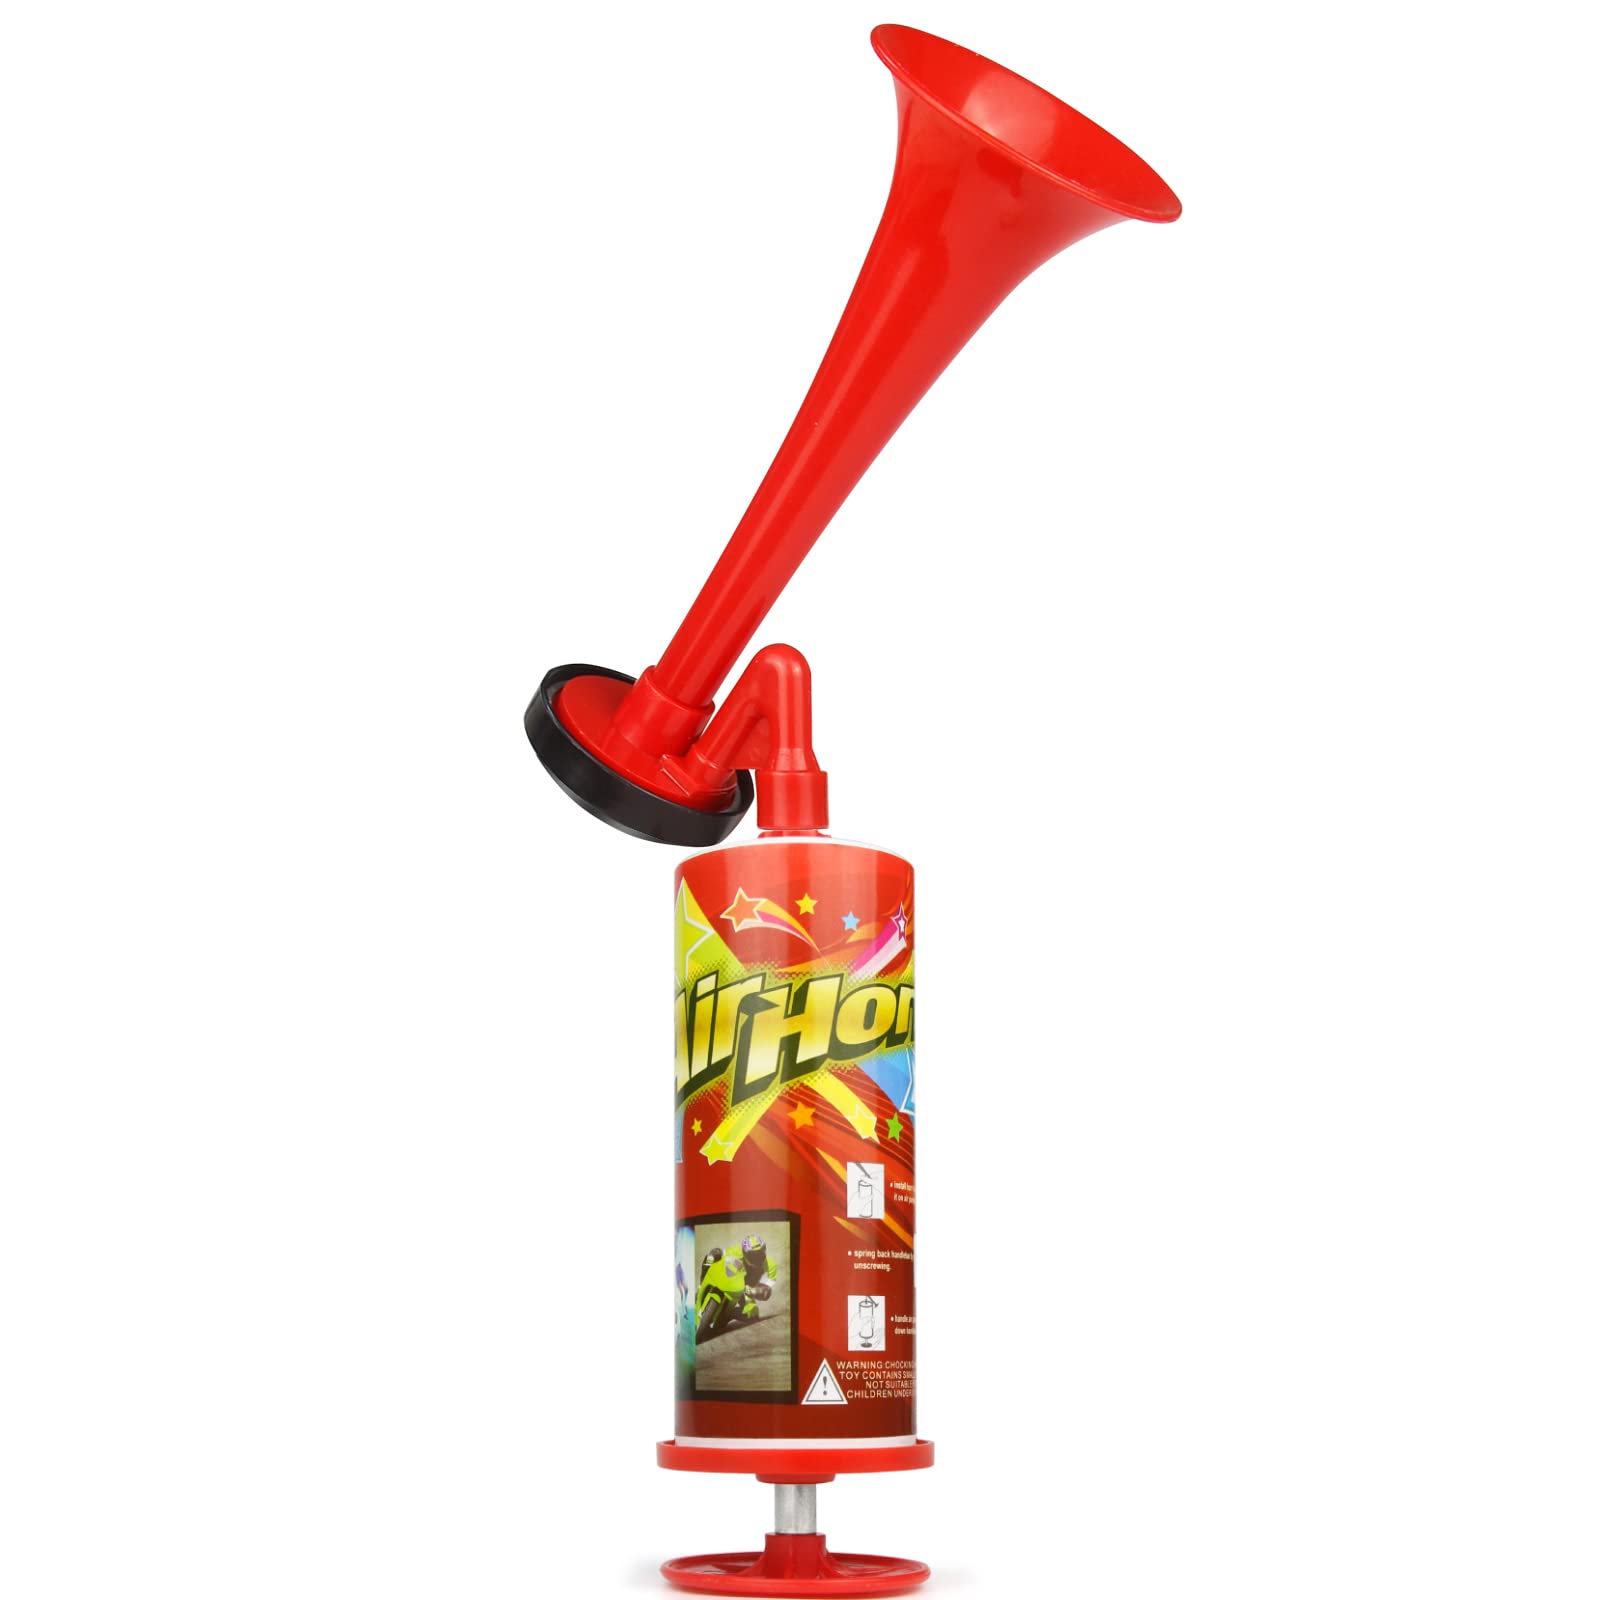 Handpush Pump Blast Air Horn HELESIN Handheld Aluminum Air Horn Gas Free  Blow Horn Loud Sound for Emergency Warning Boating Camping Party Supplies  Xmas Holiday Celebration Favors 1 PACK Large